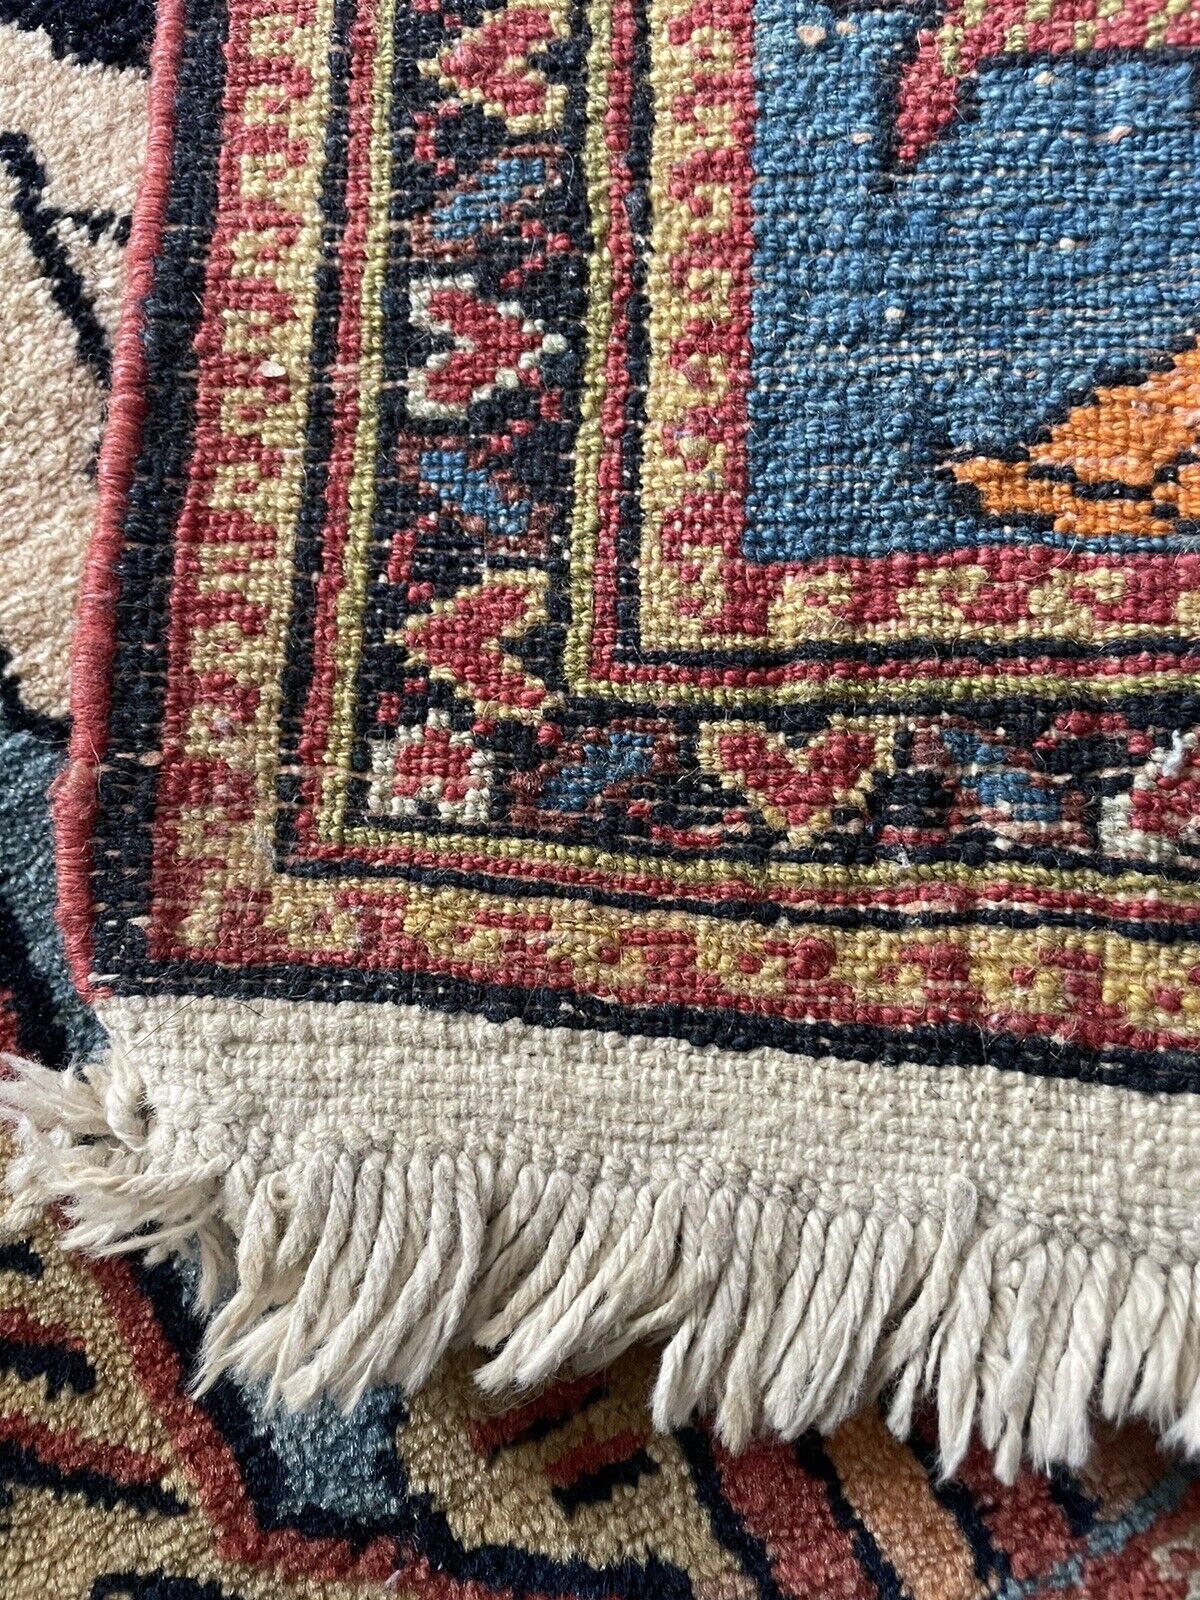 Back side of the Handmade Antique Persian Lilihan Collectible Rug - Underside view revealing the rug's construction and material.